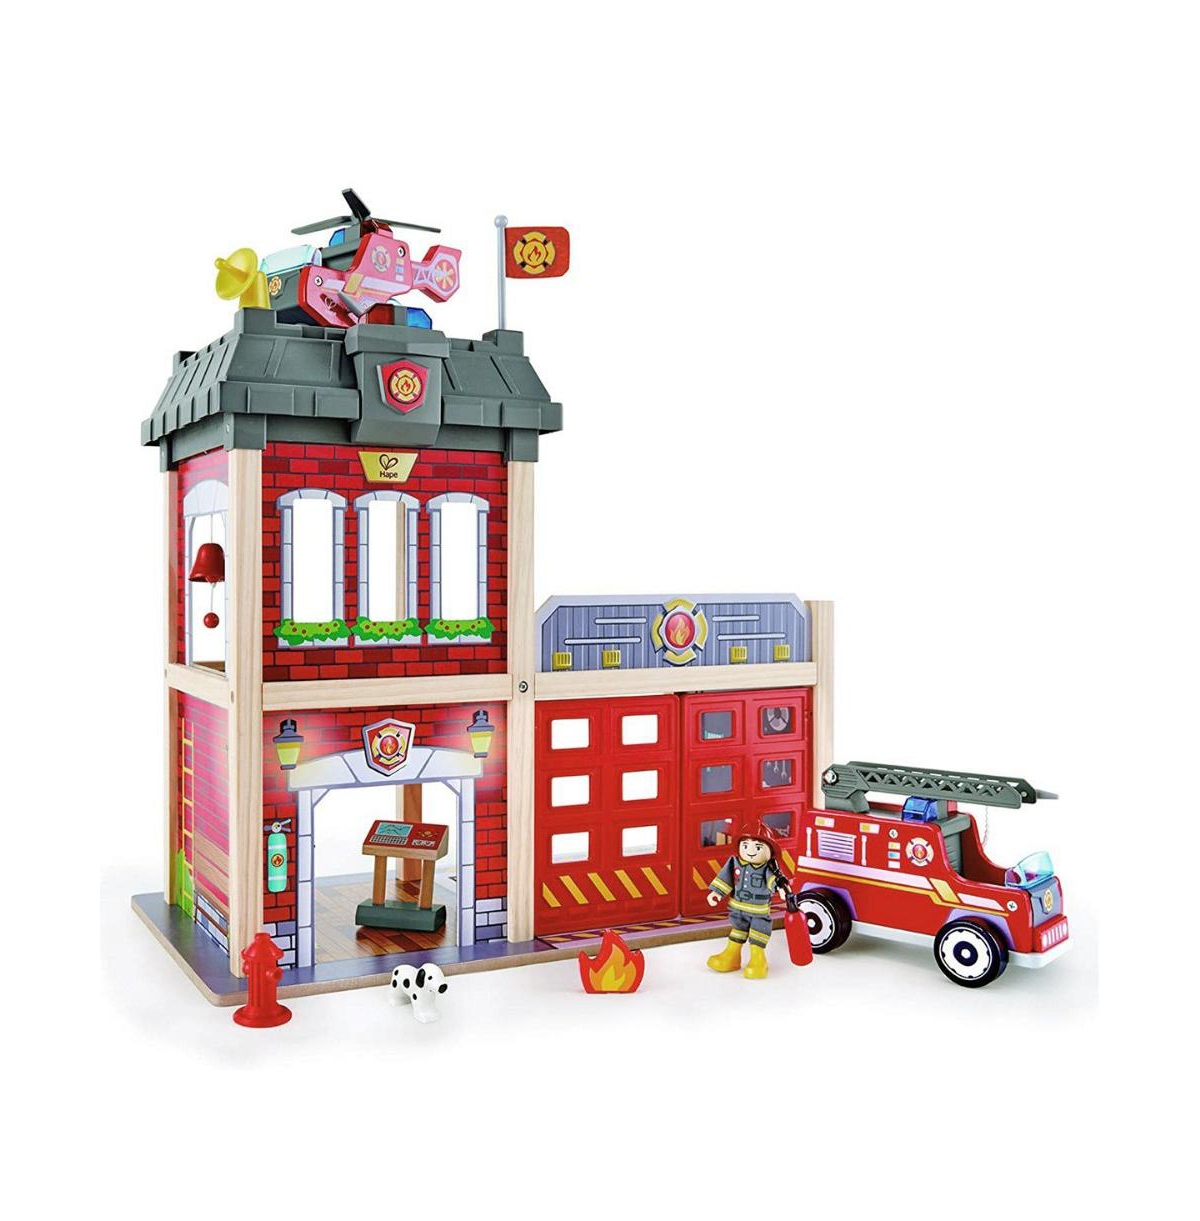 Hape Kids' Tri-level Wooden Fire Station In Multicolored